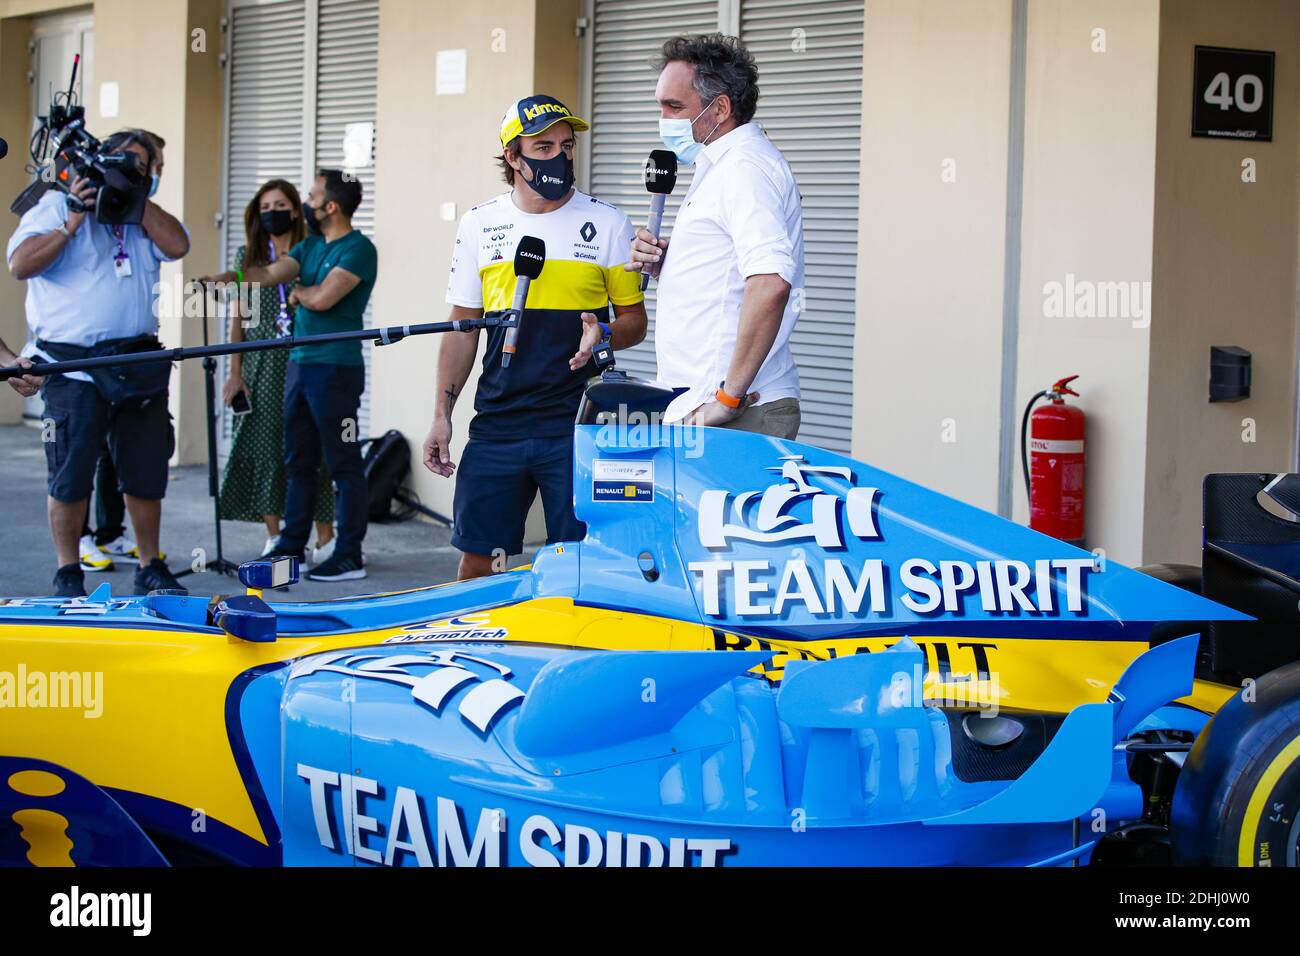 ALONSO Fernando (spa), with Franck Montagny, former team mate and Canal+ TV commentator, alongside the Renault R25 of 2005, during the Formula 1 Etihad Airways Abu Dhabi Grand Prix 2020, from December